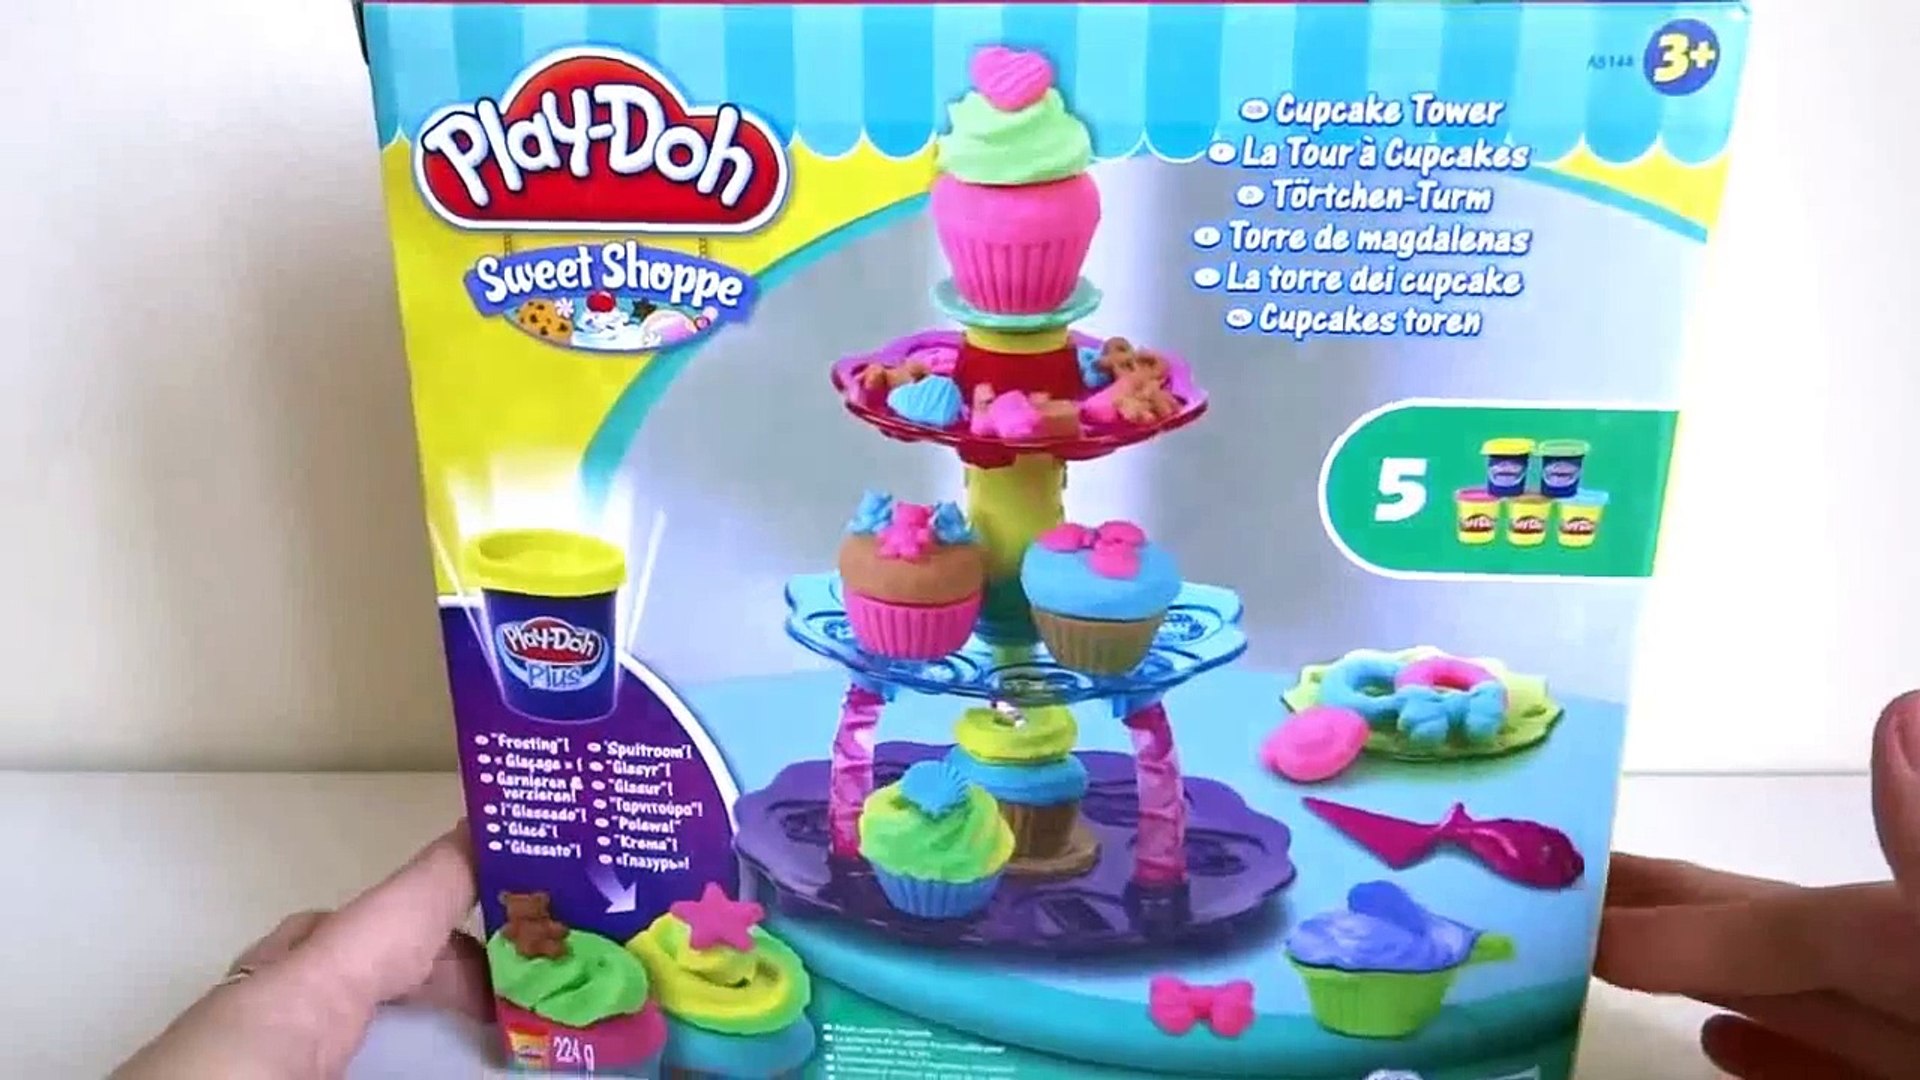 Play-Doh Cupcake Tower Includes 3 Pots Of Play-Doh & 2 Pots Of Play-Doh Plus 